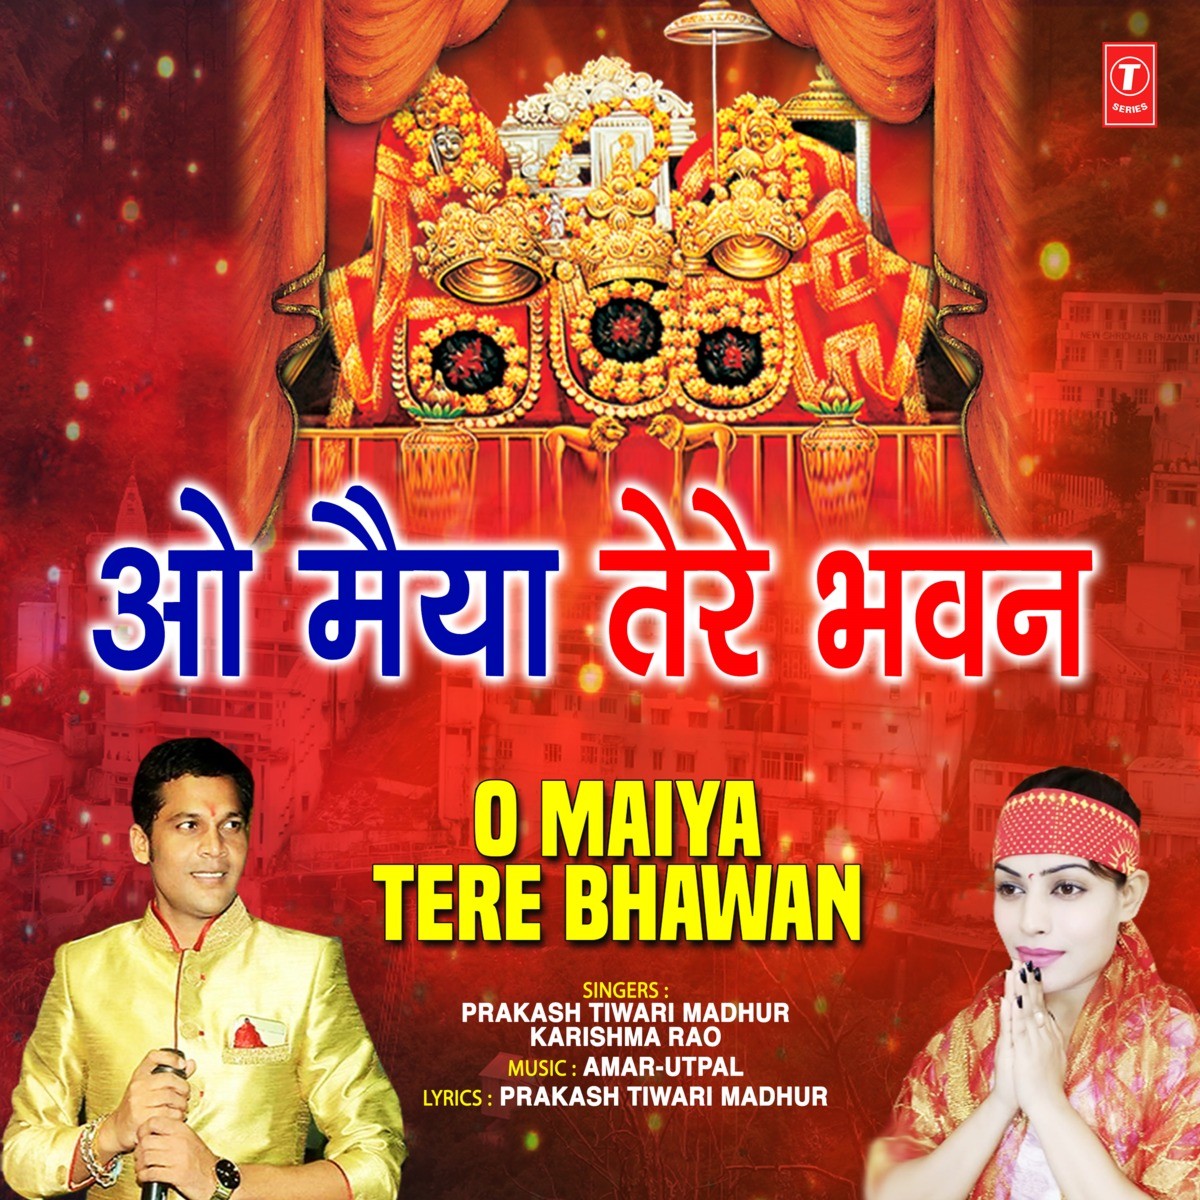 O Maiya Tere Bhawan Song Download O Maiya Tere Bhawan Mp3 Song Online Free On Gaana Com Listen and download to an exclusive collection of o maiya ringtones for free to personalize your iphone or android device. gaana